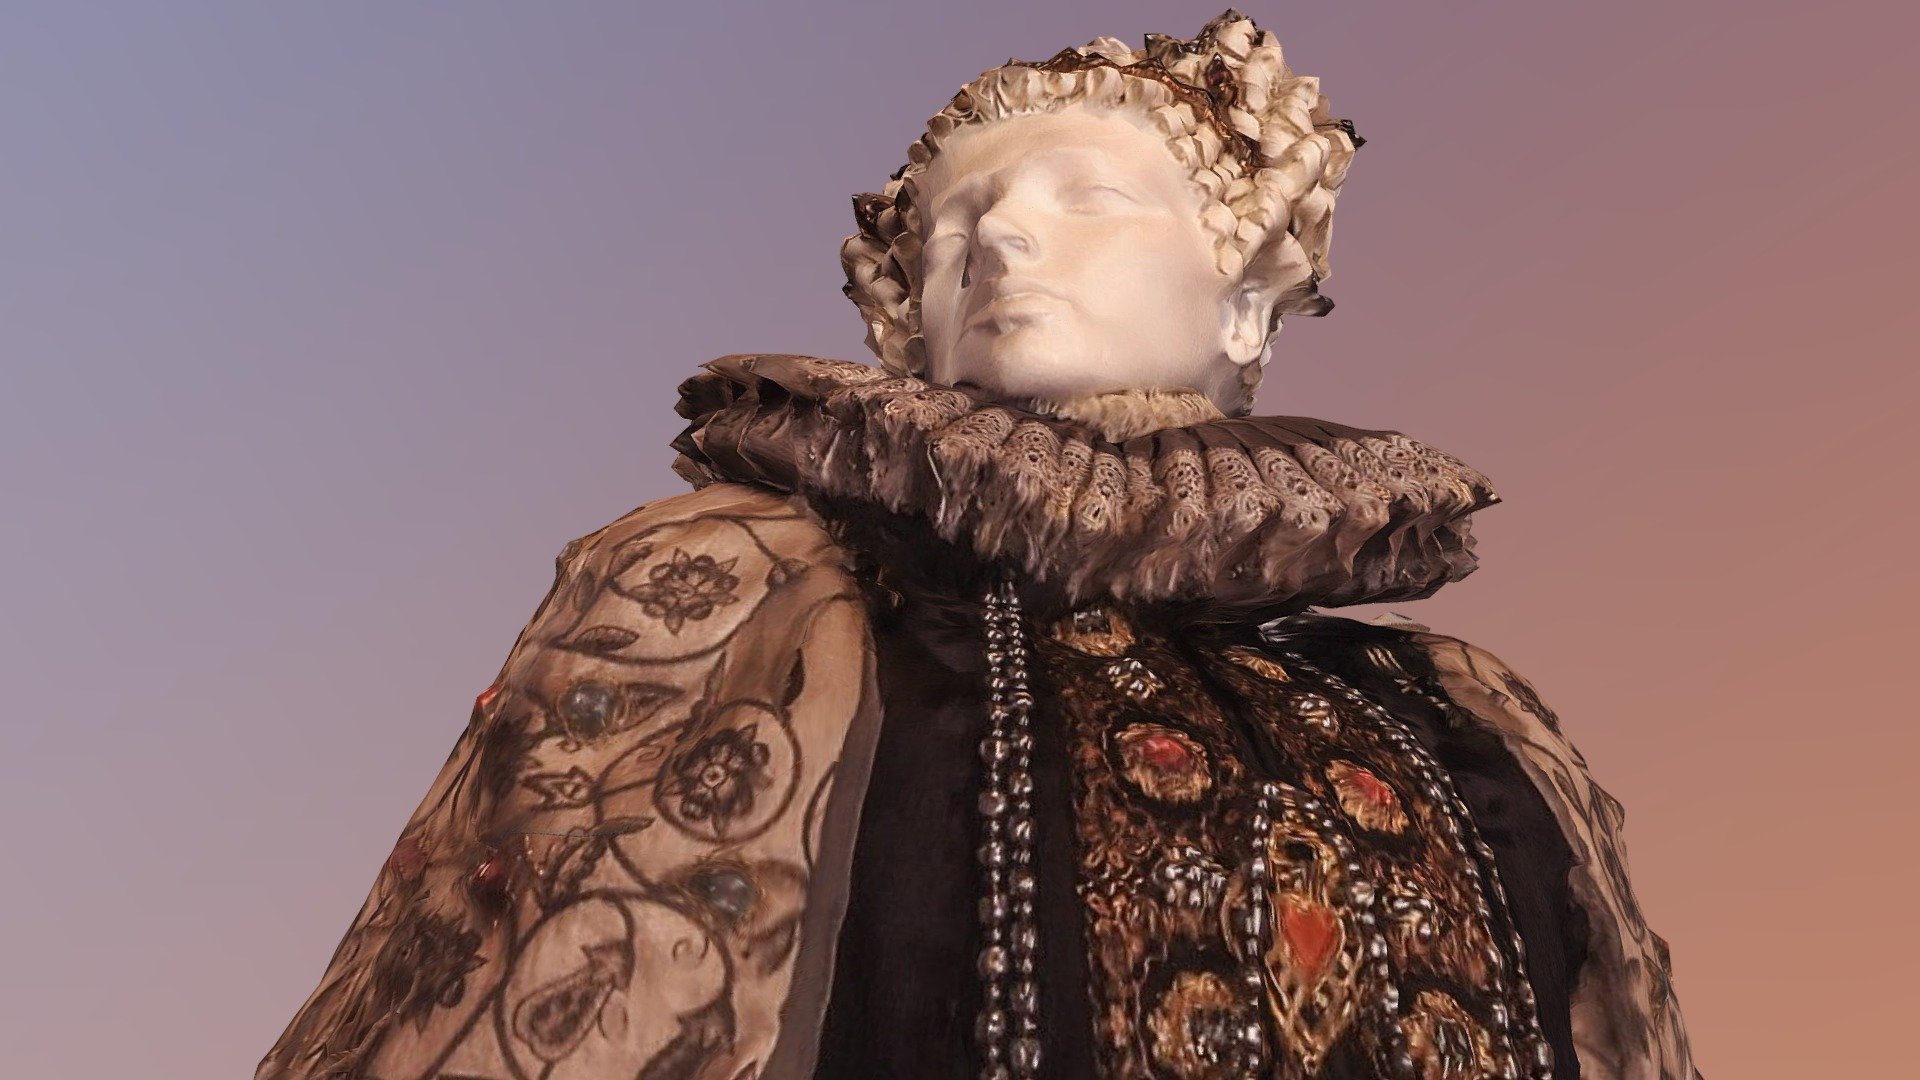 In Mary Queen of Scots, Oscar-nominated costume designer Alexandra Byrne created incredible 16th century clothing. We interviewed her and discussed how she leveraged her historic knowledge to create Queen Elizabeth’s powerful wardrobe.

Focus Features • Nominated for 2 Oscars • Alexandra Bryne, designer

Download the USA TODAY app for the full augmented reality experience 3d model